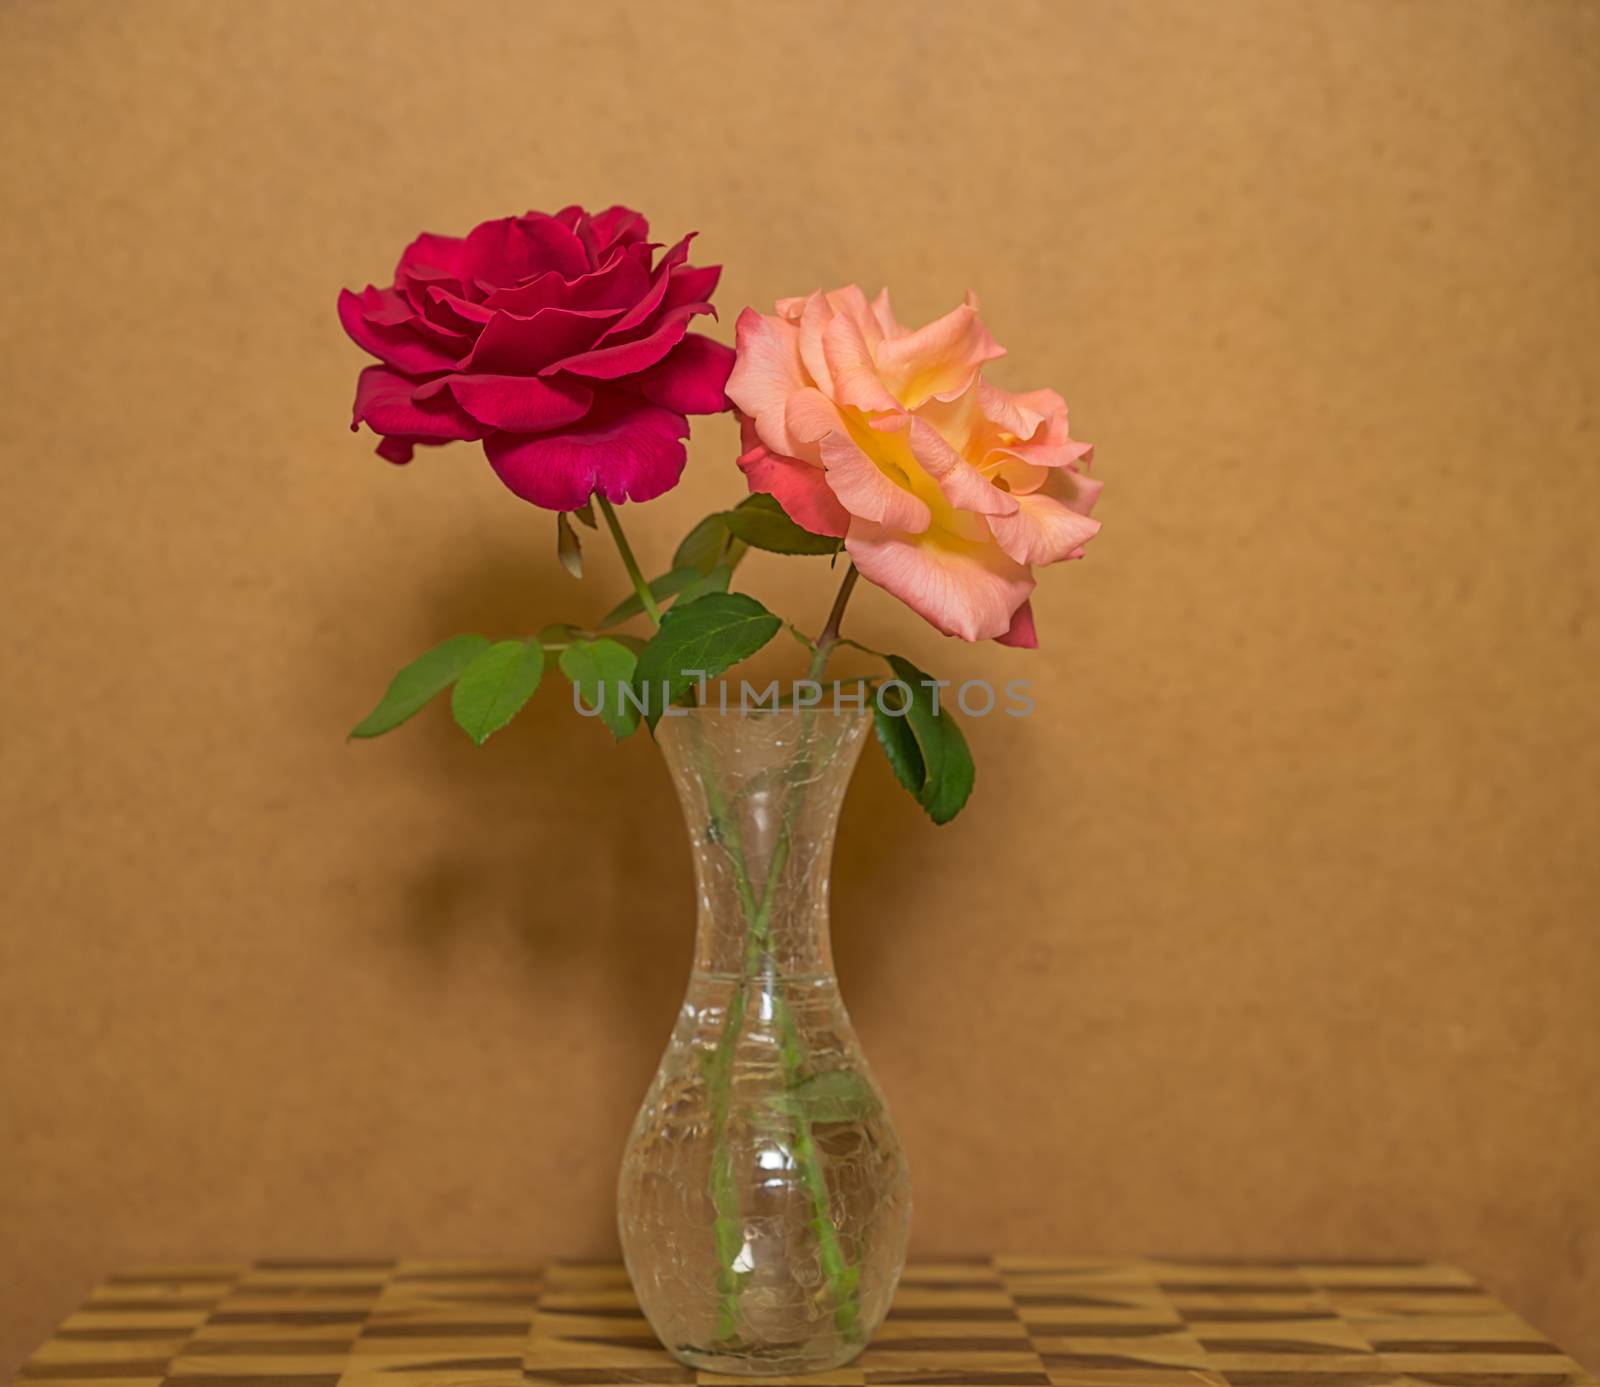 two rose flowers in a vase